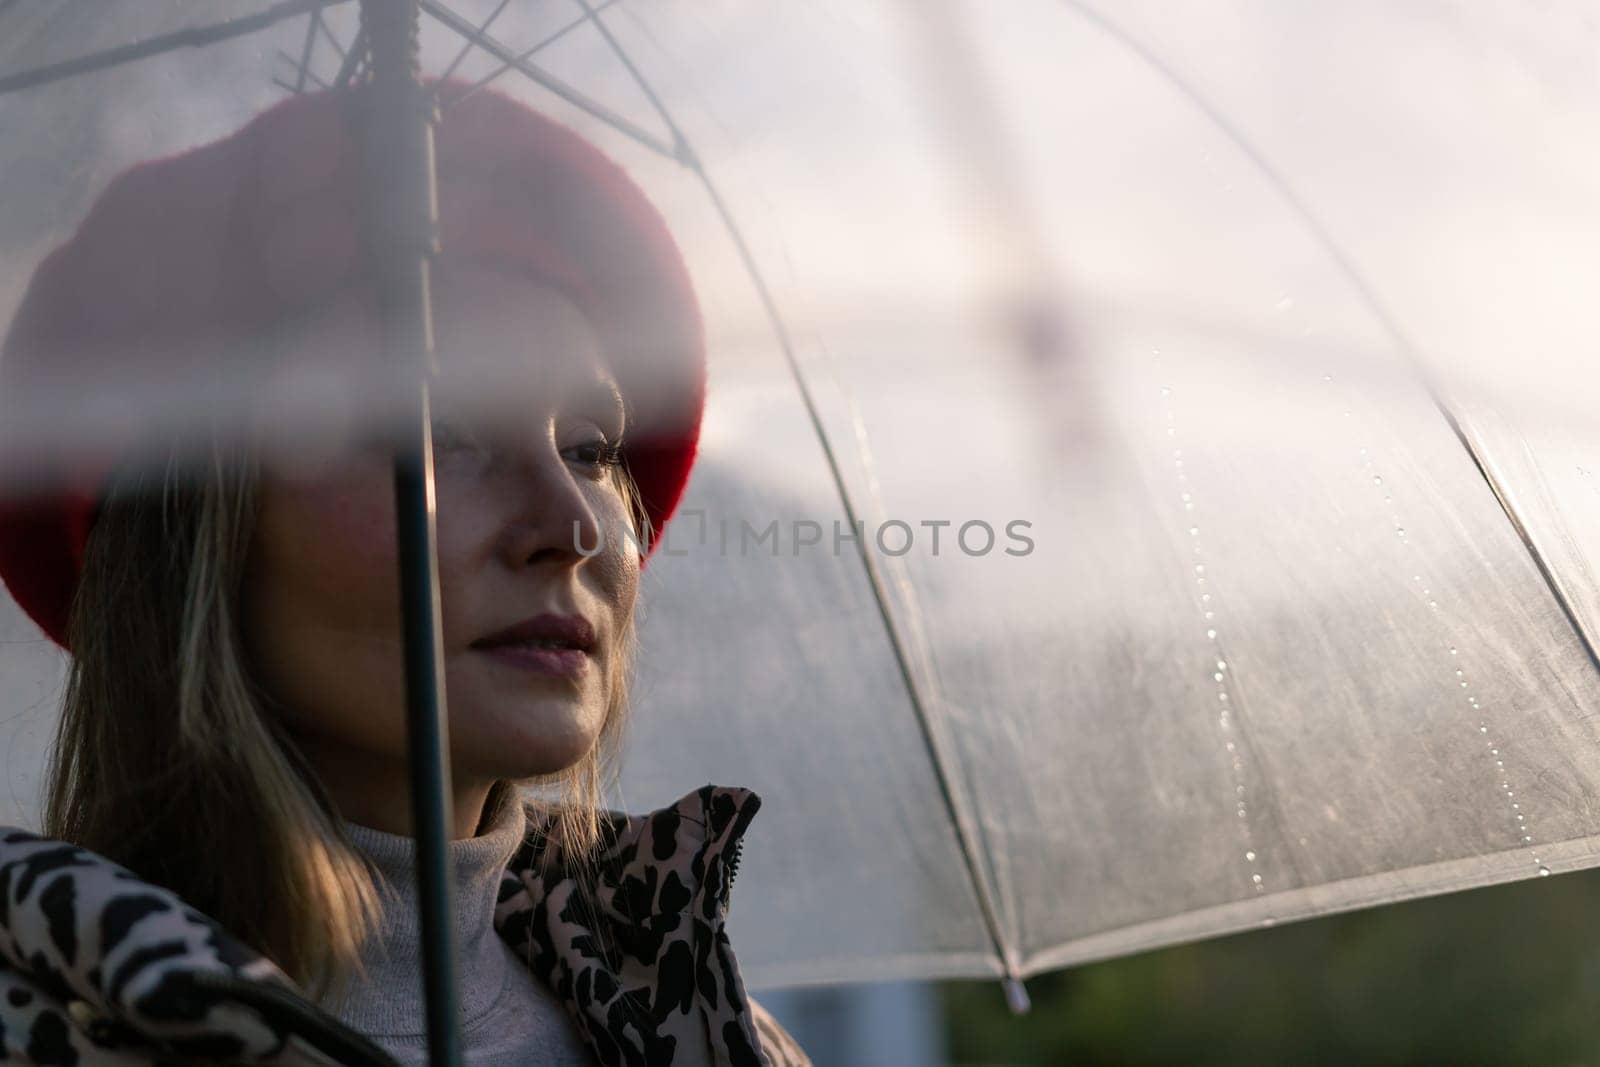 A woman wearing a red hat and a black and white jacket is holding a clear umbrella. The umbrella is open, and the woman is looking up at the sky. Concept of solitude and contemplation. by Matiunina